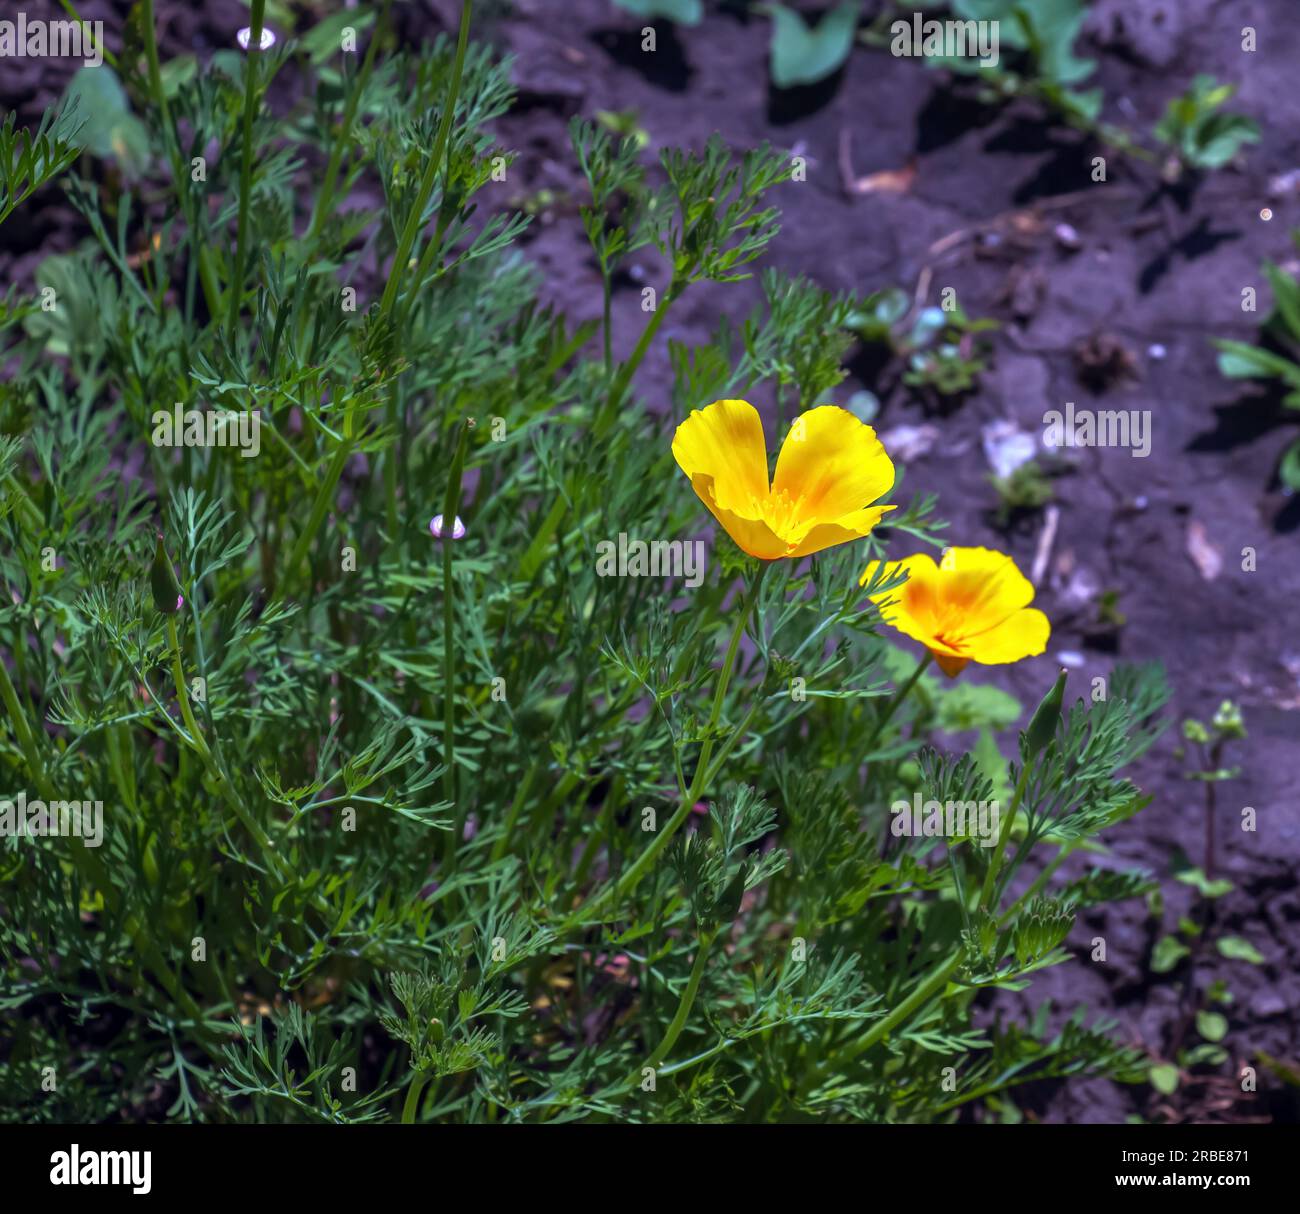 Orange flower California poppy, or Golden poppy, Cup of gold. Its Latin name is Eschscholzia Californica, native to the US and Mexico. Stock Photo